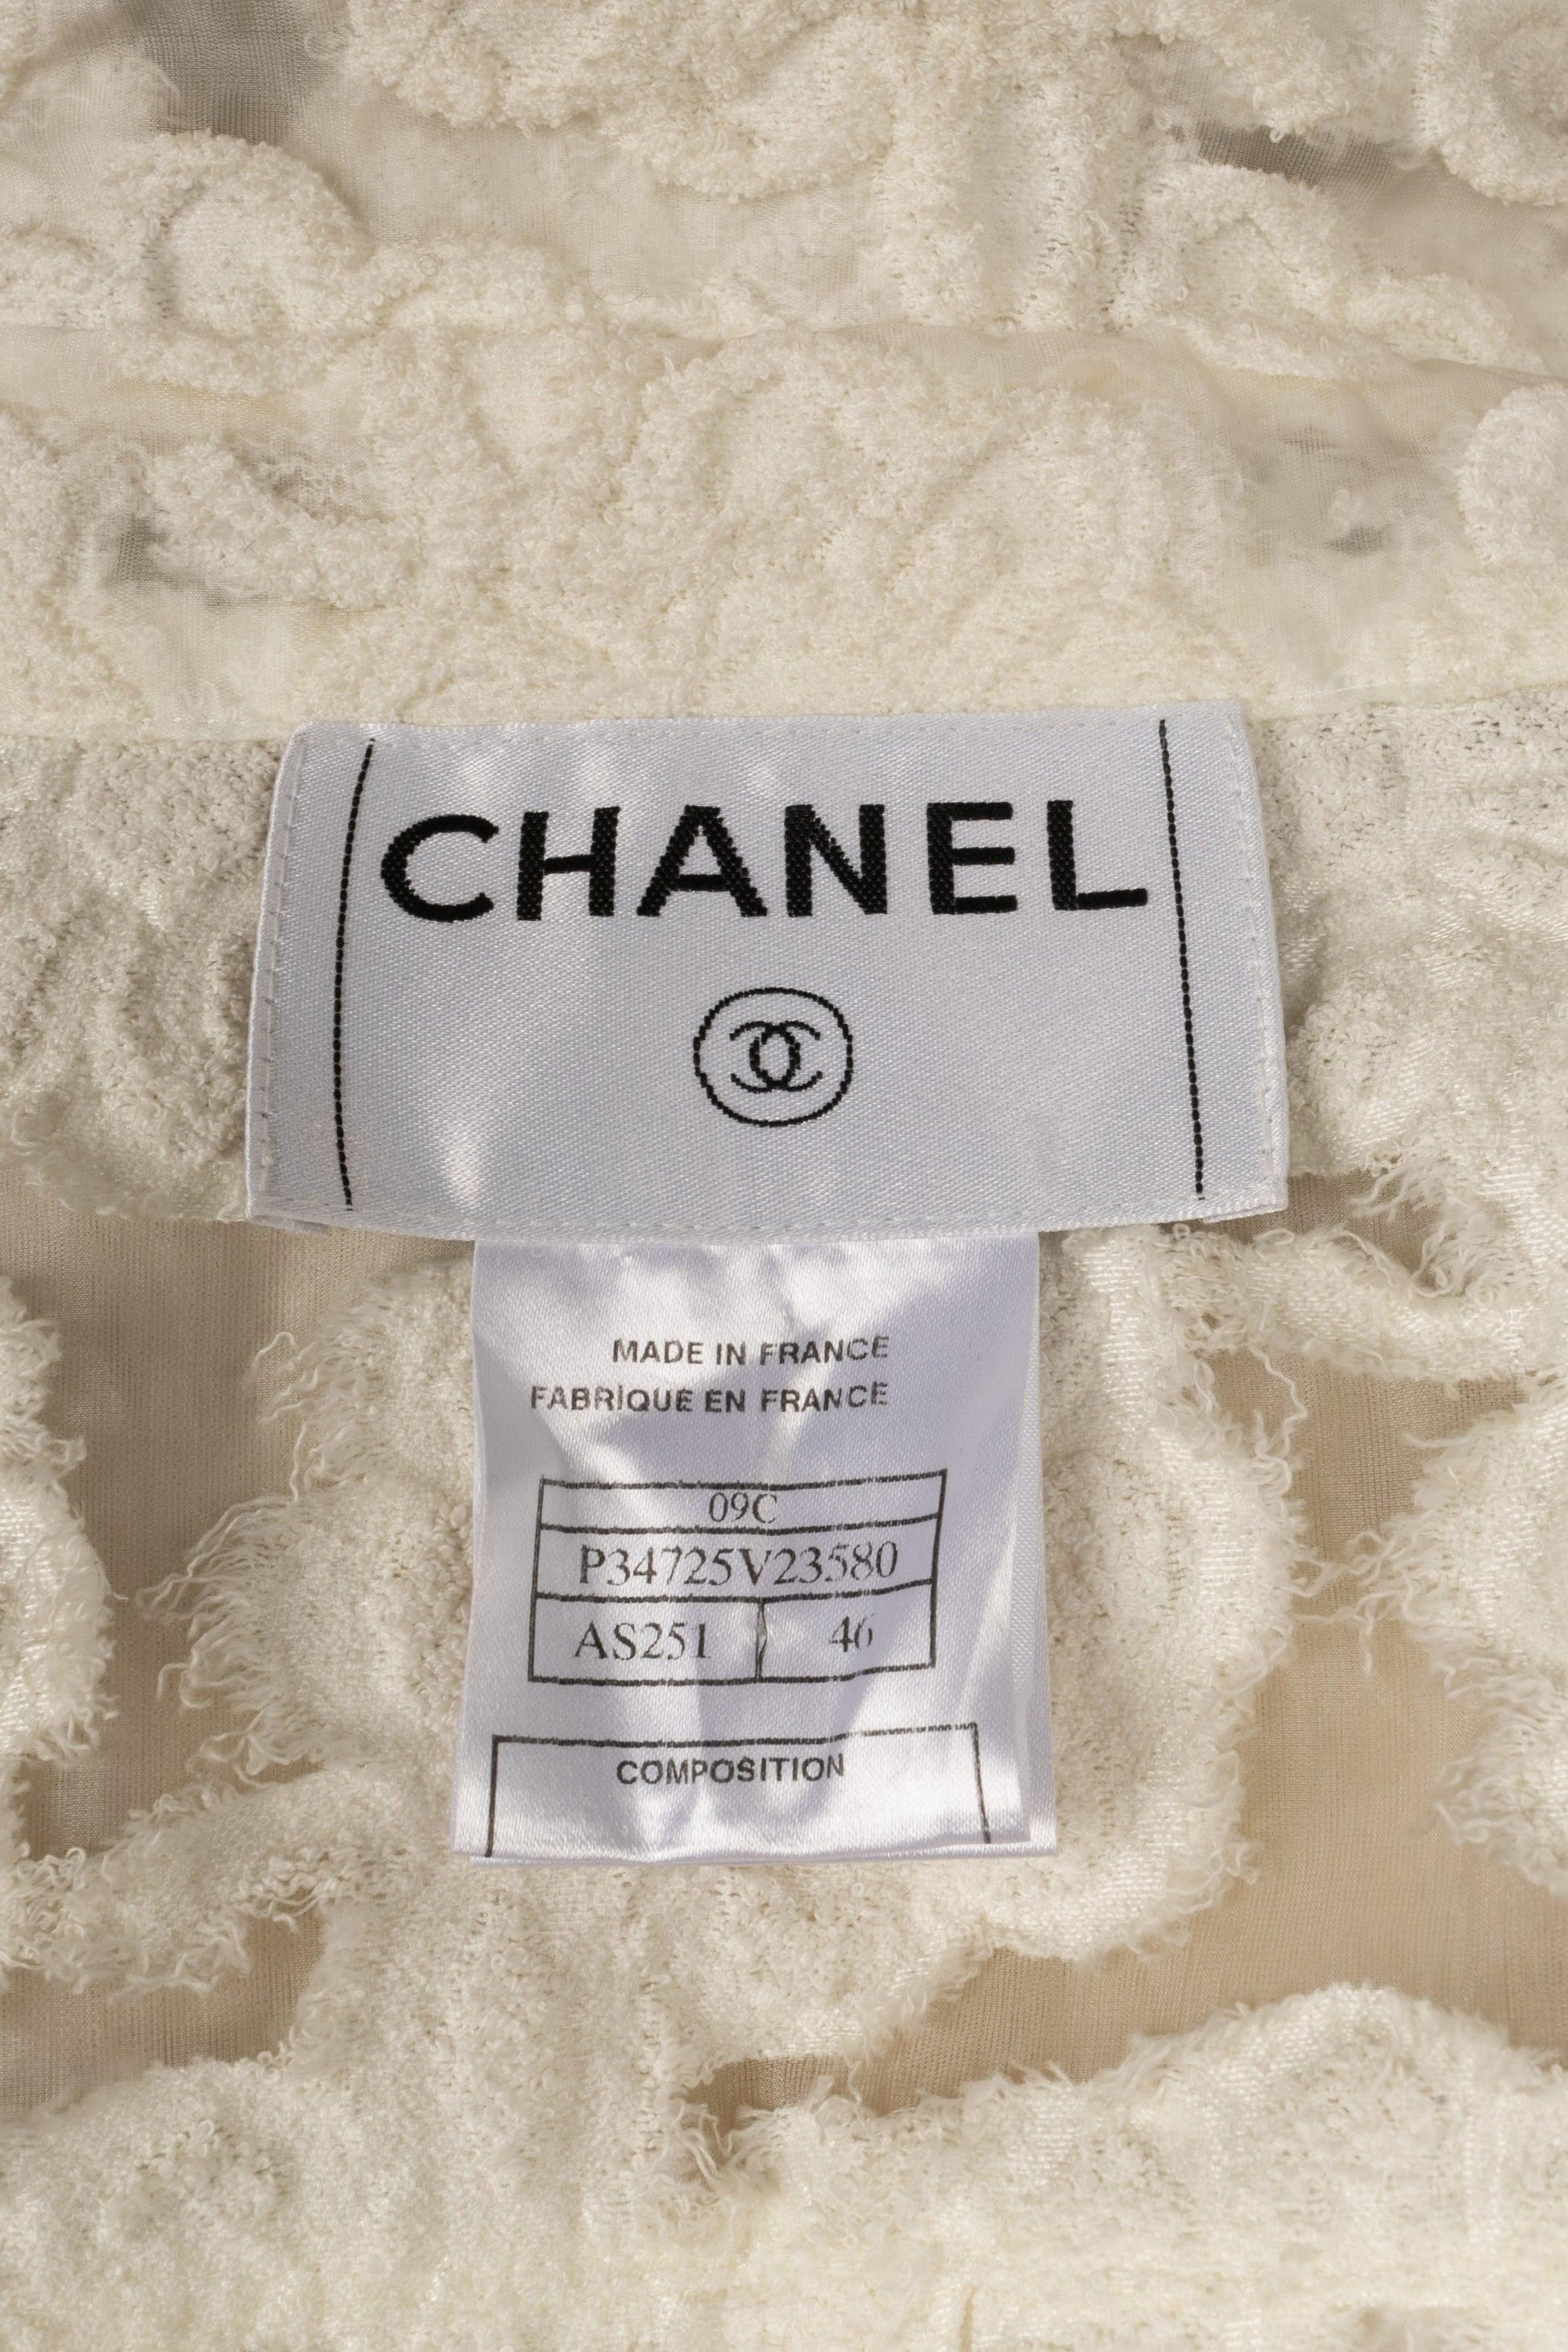 Chanel Blended Cotton Openwork Jacket Representing White Flowers, 2009 For Sale 4